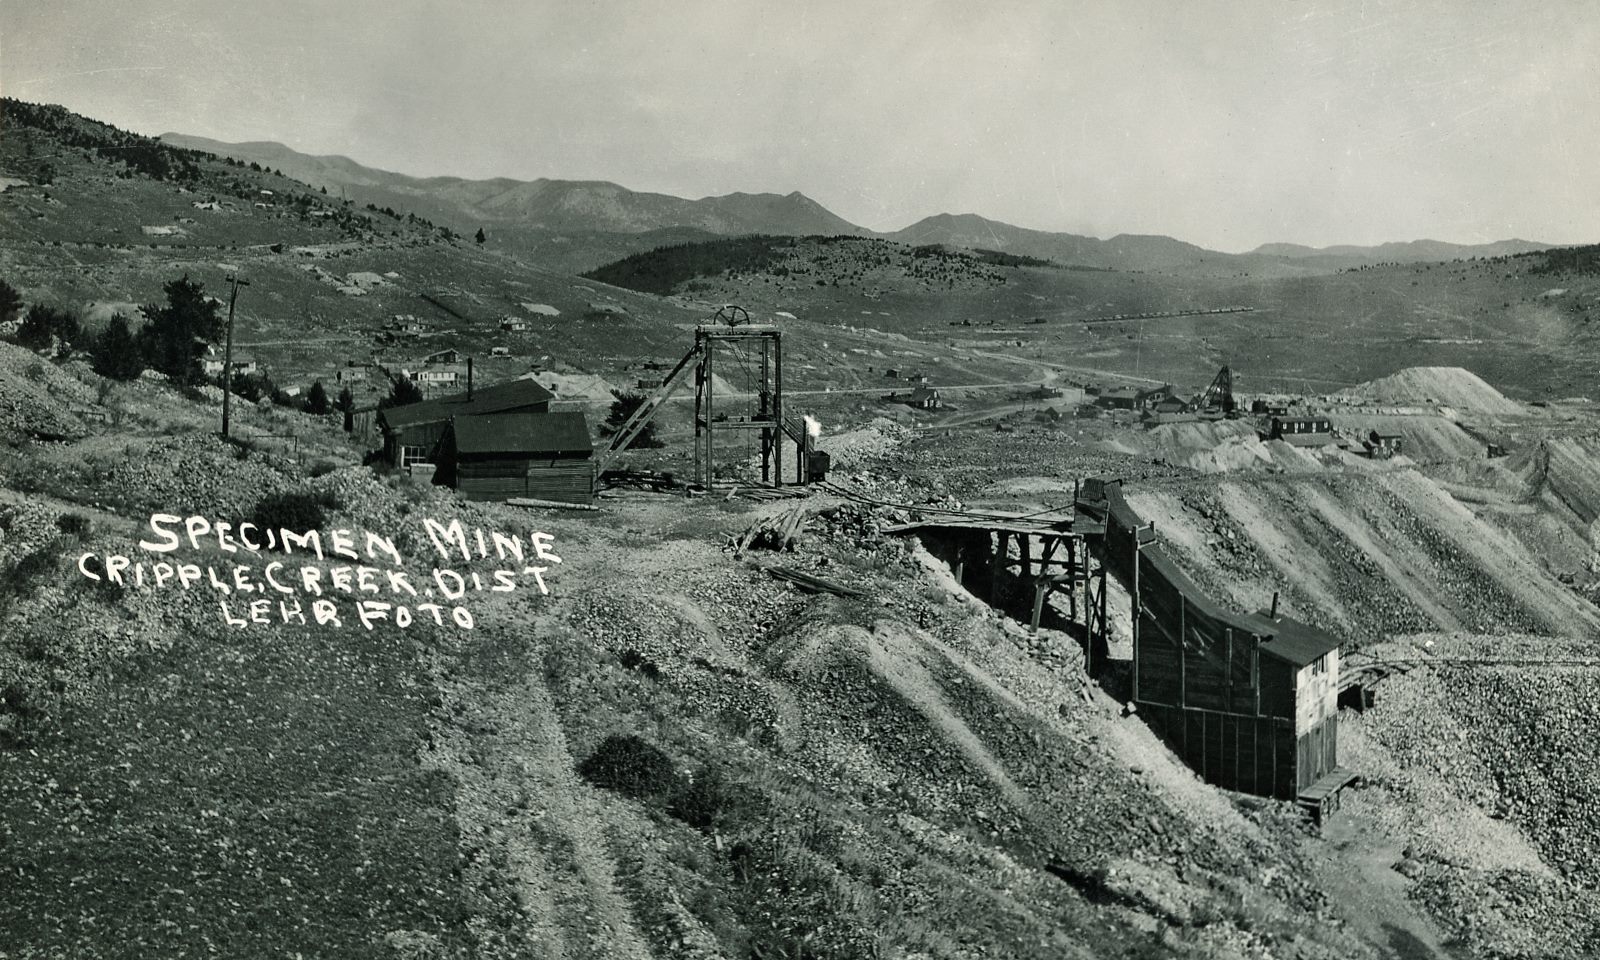 This view is a straightened, enhanced and cropped version of the 300dpi scan I did of the source postcard, showing the Specimen Mine Surface structures in the foreground. Direction of this view is east, northeast, on Bull Hill. The Specimen Mine operation is seen with an open Head-Frame and Hoist-house and shed linked to it, and a small Ore-house to the right down the hillside a small bit.
   In the distance, up from the orehouse, the surface structures of the Vindicator No. 1 Mine are seen with a large Head-frame and Ore-house down into massive dumps, impossible to tell if it still is linked to a railroad or not in this view. Further on in the distance to the left, a big string of railroad cars say that the Midland Terminal is still in operation, but there is no trace of the High Line Electric Division, as where that should be I only see a road surface – cutting almost the headframe of the Specimen Mine in two so to speak.
   Image is not sharp enough to tell if there are any rails left on the old Golden Circle tracks seen climbing Bull Hill, or is it Bull Cliff, about 1/4 down from top and about 1/4 in from left-hand side, but I do think the standard gauge M.T. tracks are there still when this photo was taken by Lehr many years ago.